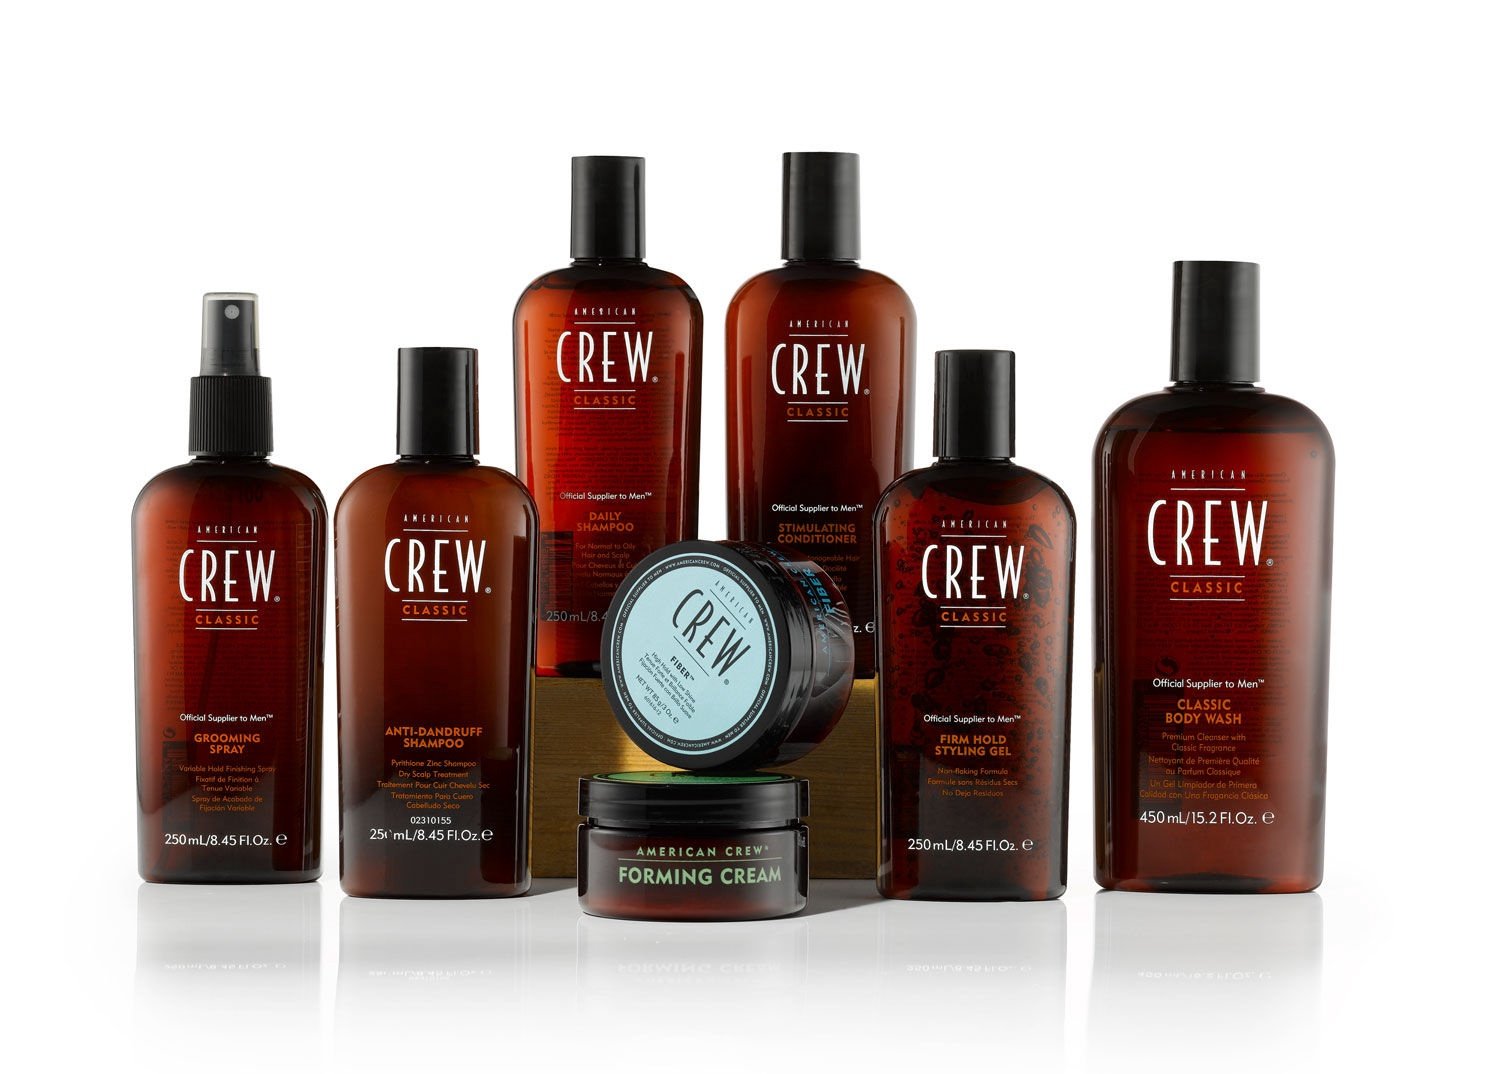 American Crew - Power Cleanser Style Remover - by American Crew |ProCare Outlet|